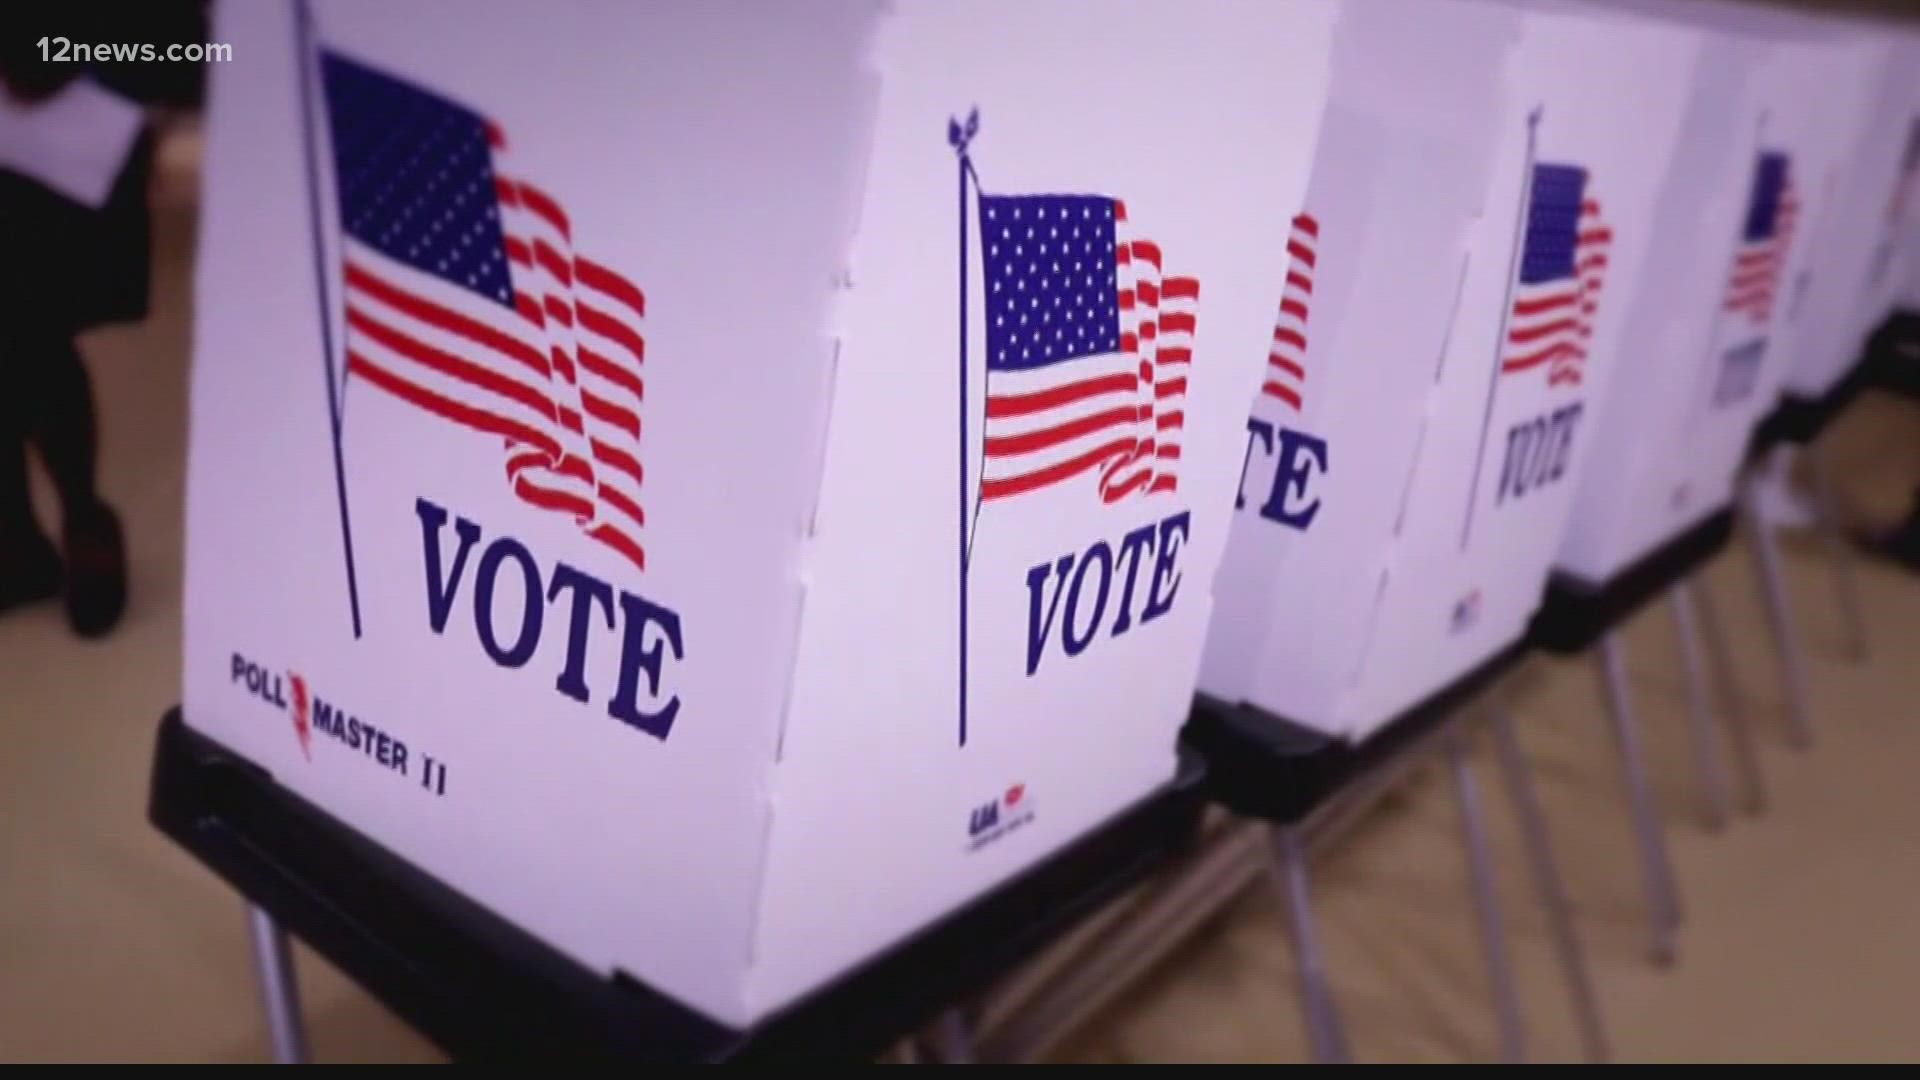 The auditors of Arizona's election said there may have been upwards of 17,000 duplicate ballots and questioned the signatures of some of those ballots.